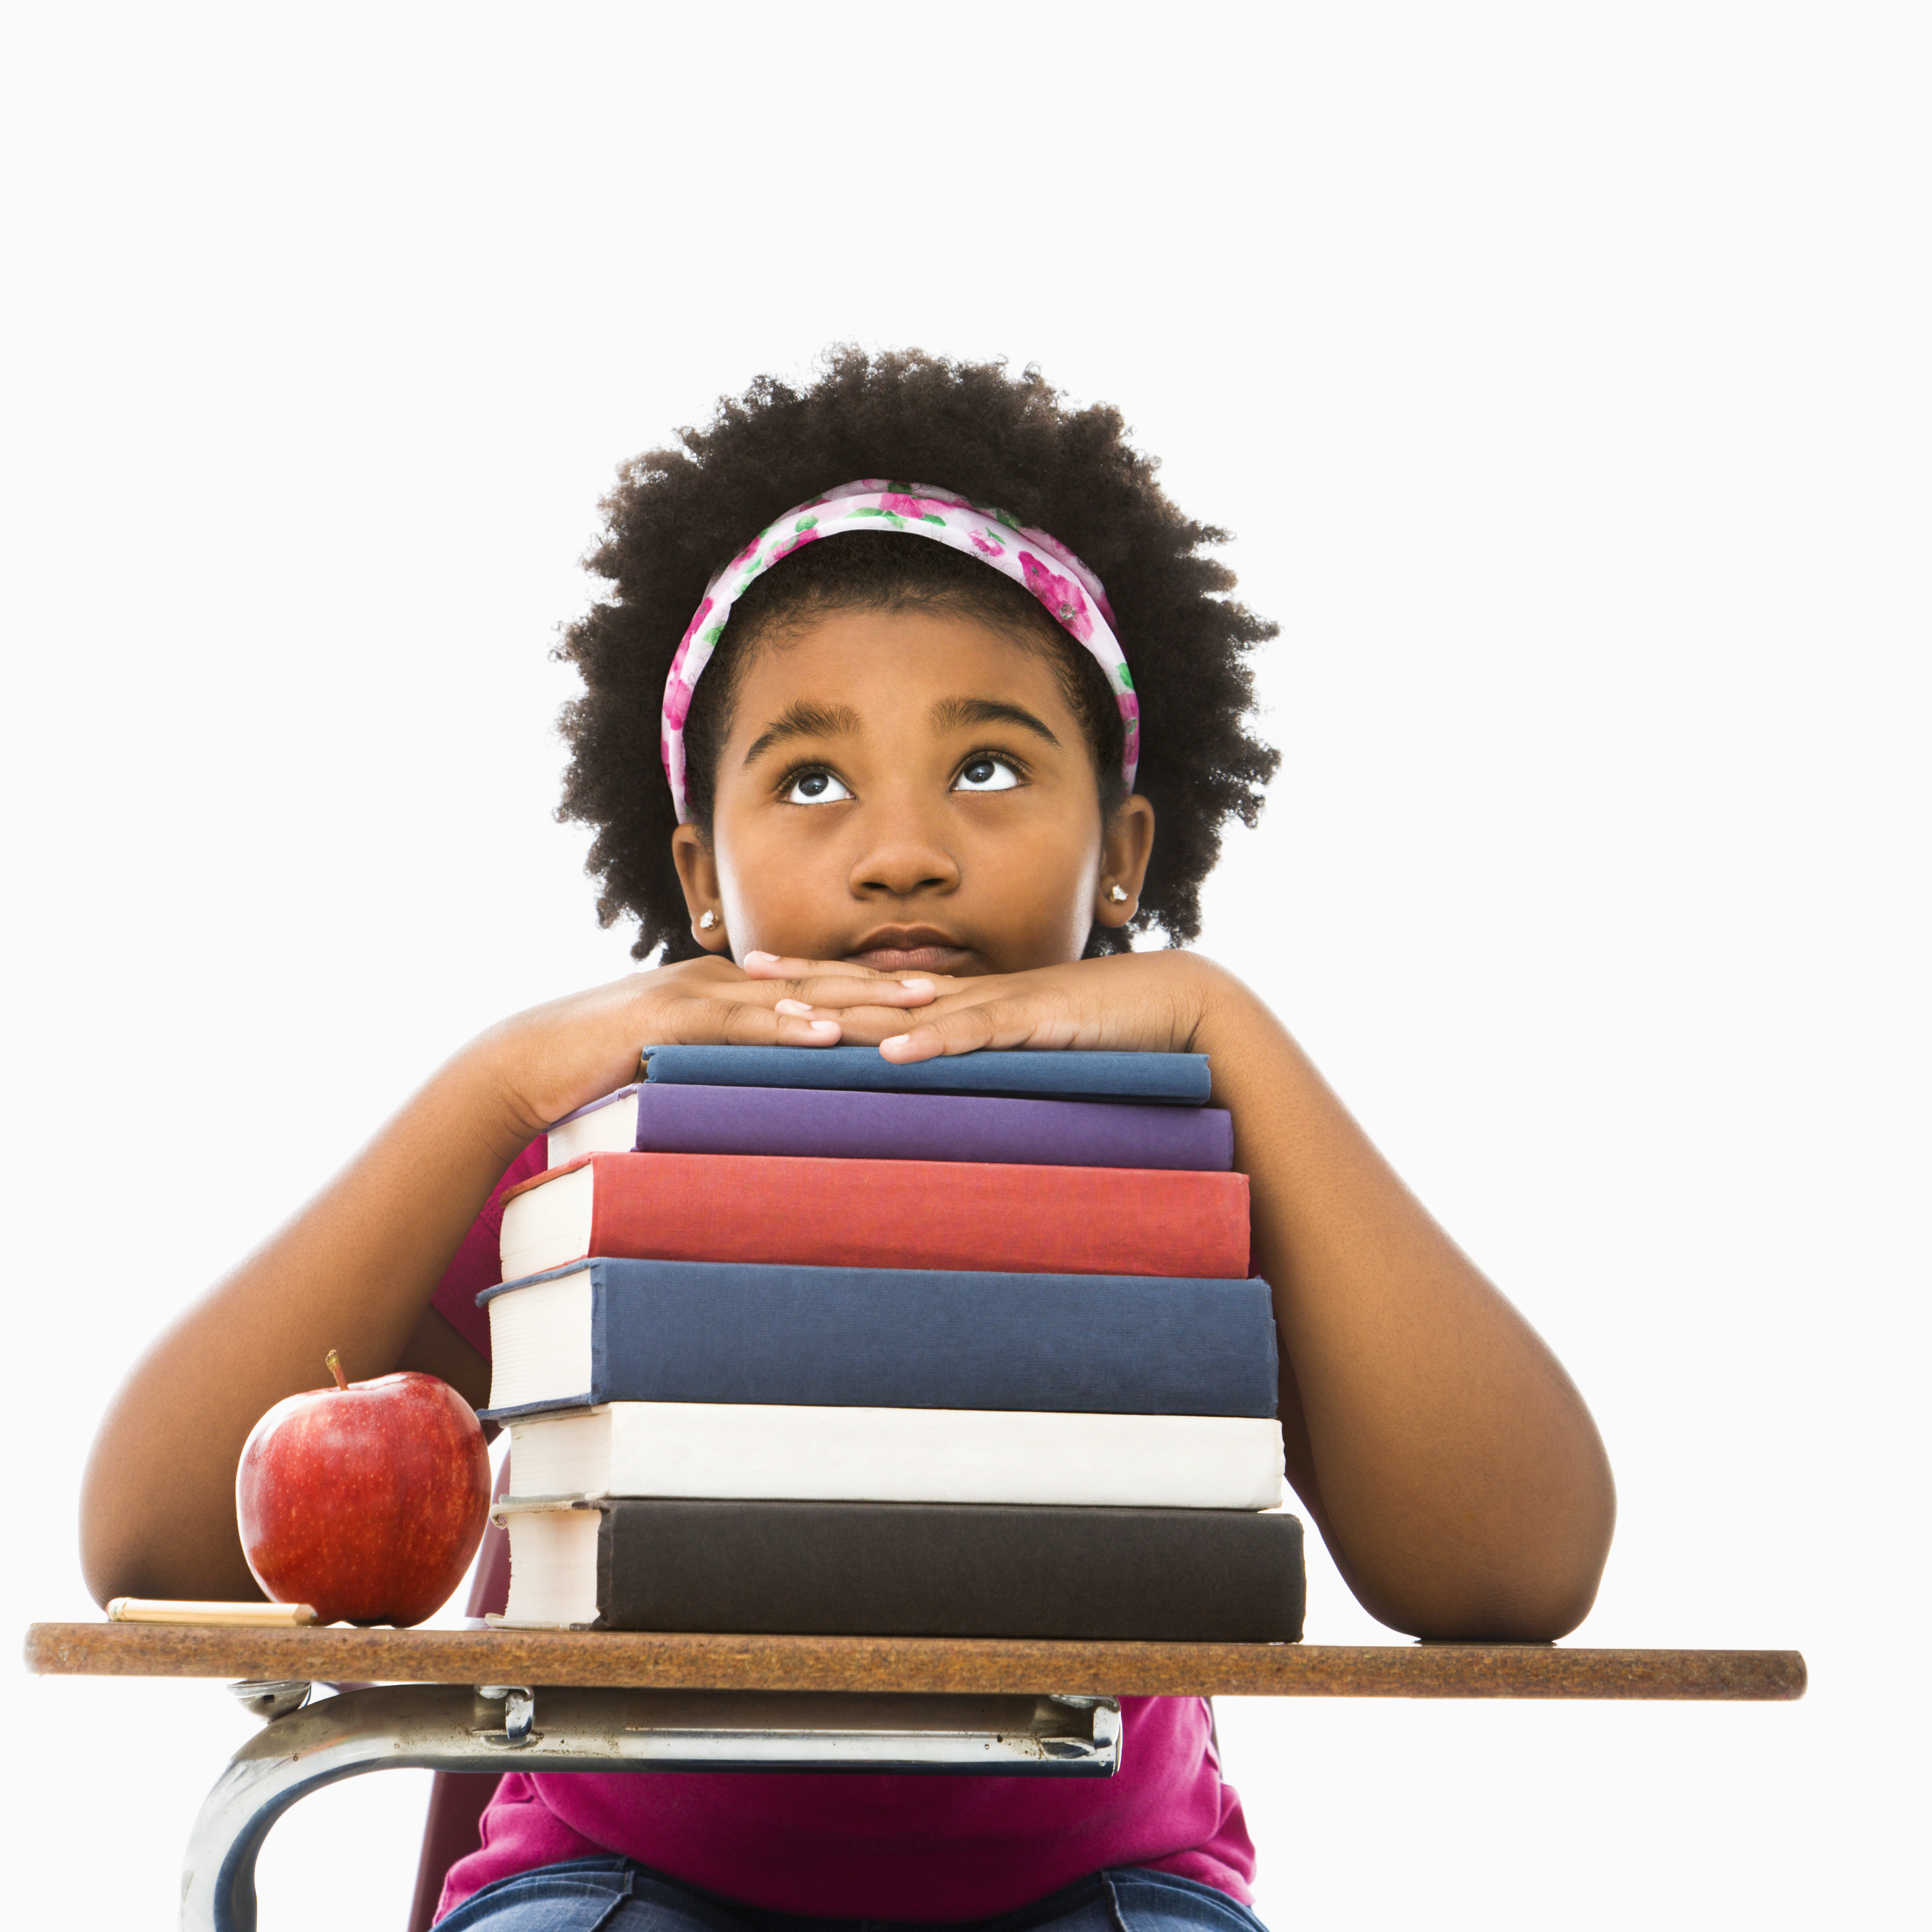 Girl sitting at desk with stack of books